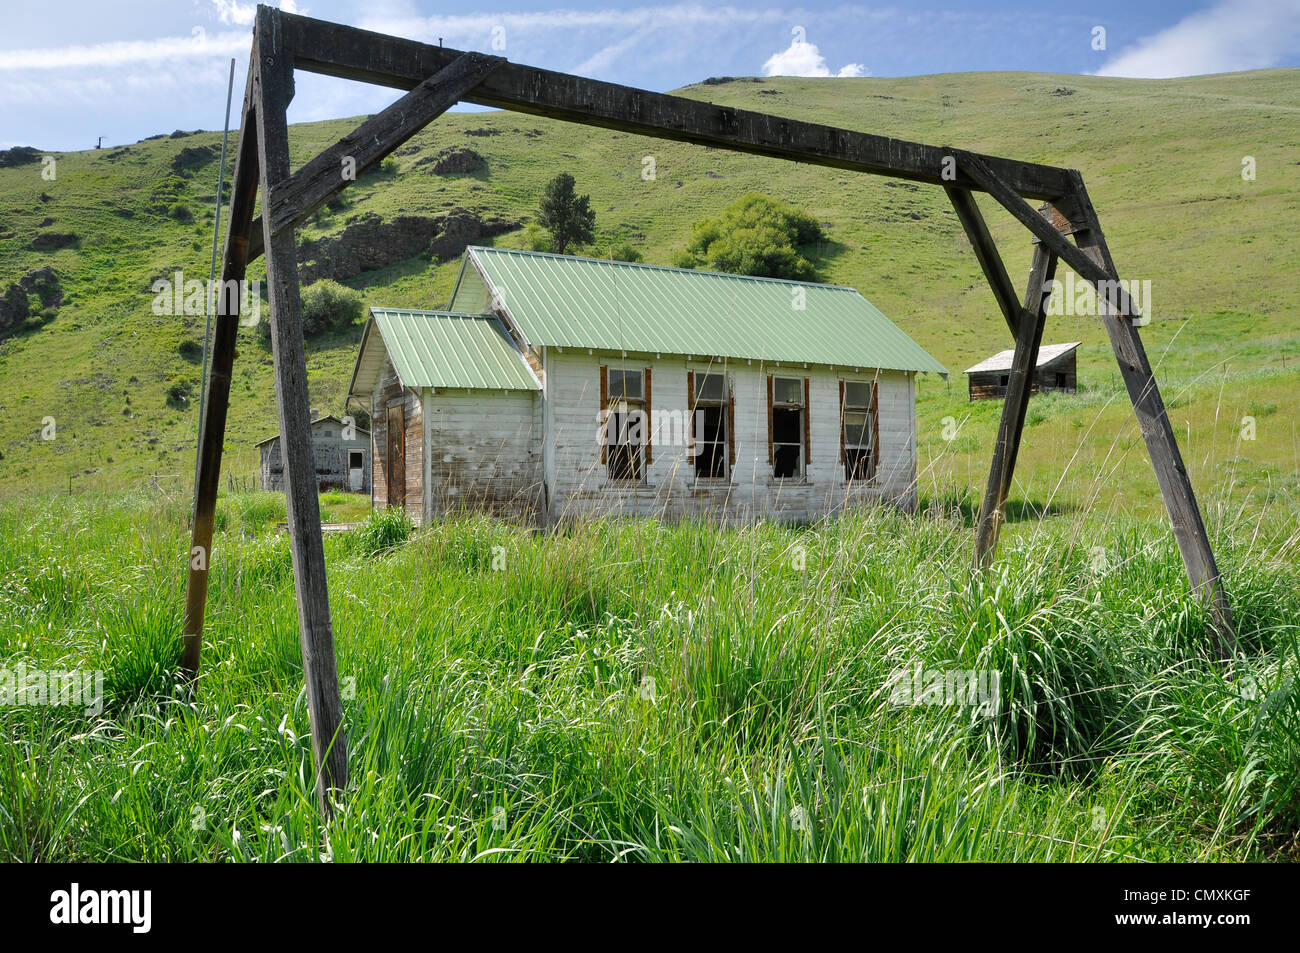 The old Lewis School in the Chesnimus area of Wallowa County in Northeast Oregon. Stock Photo